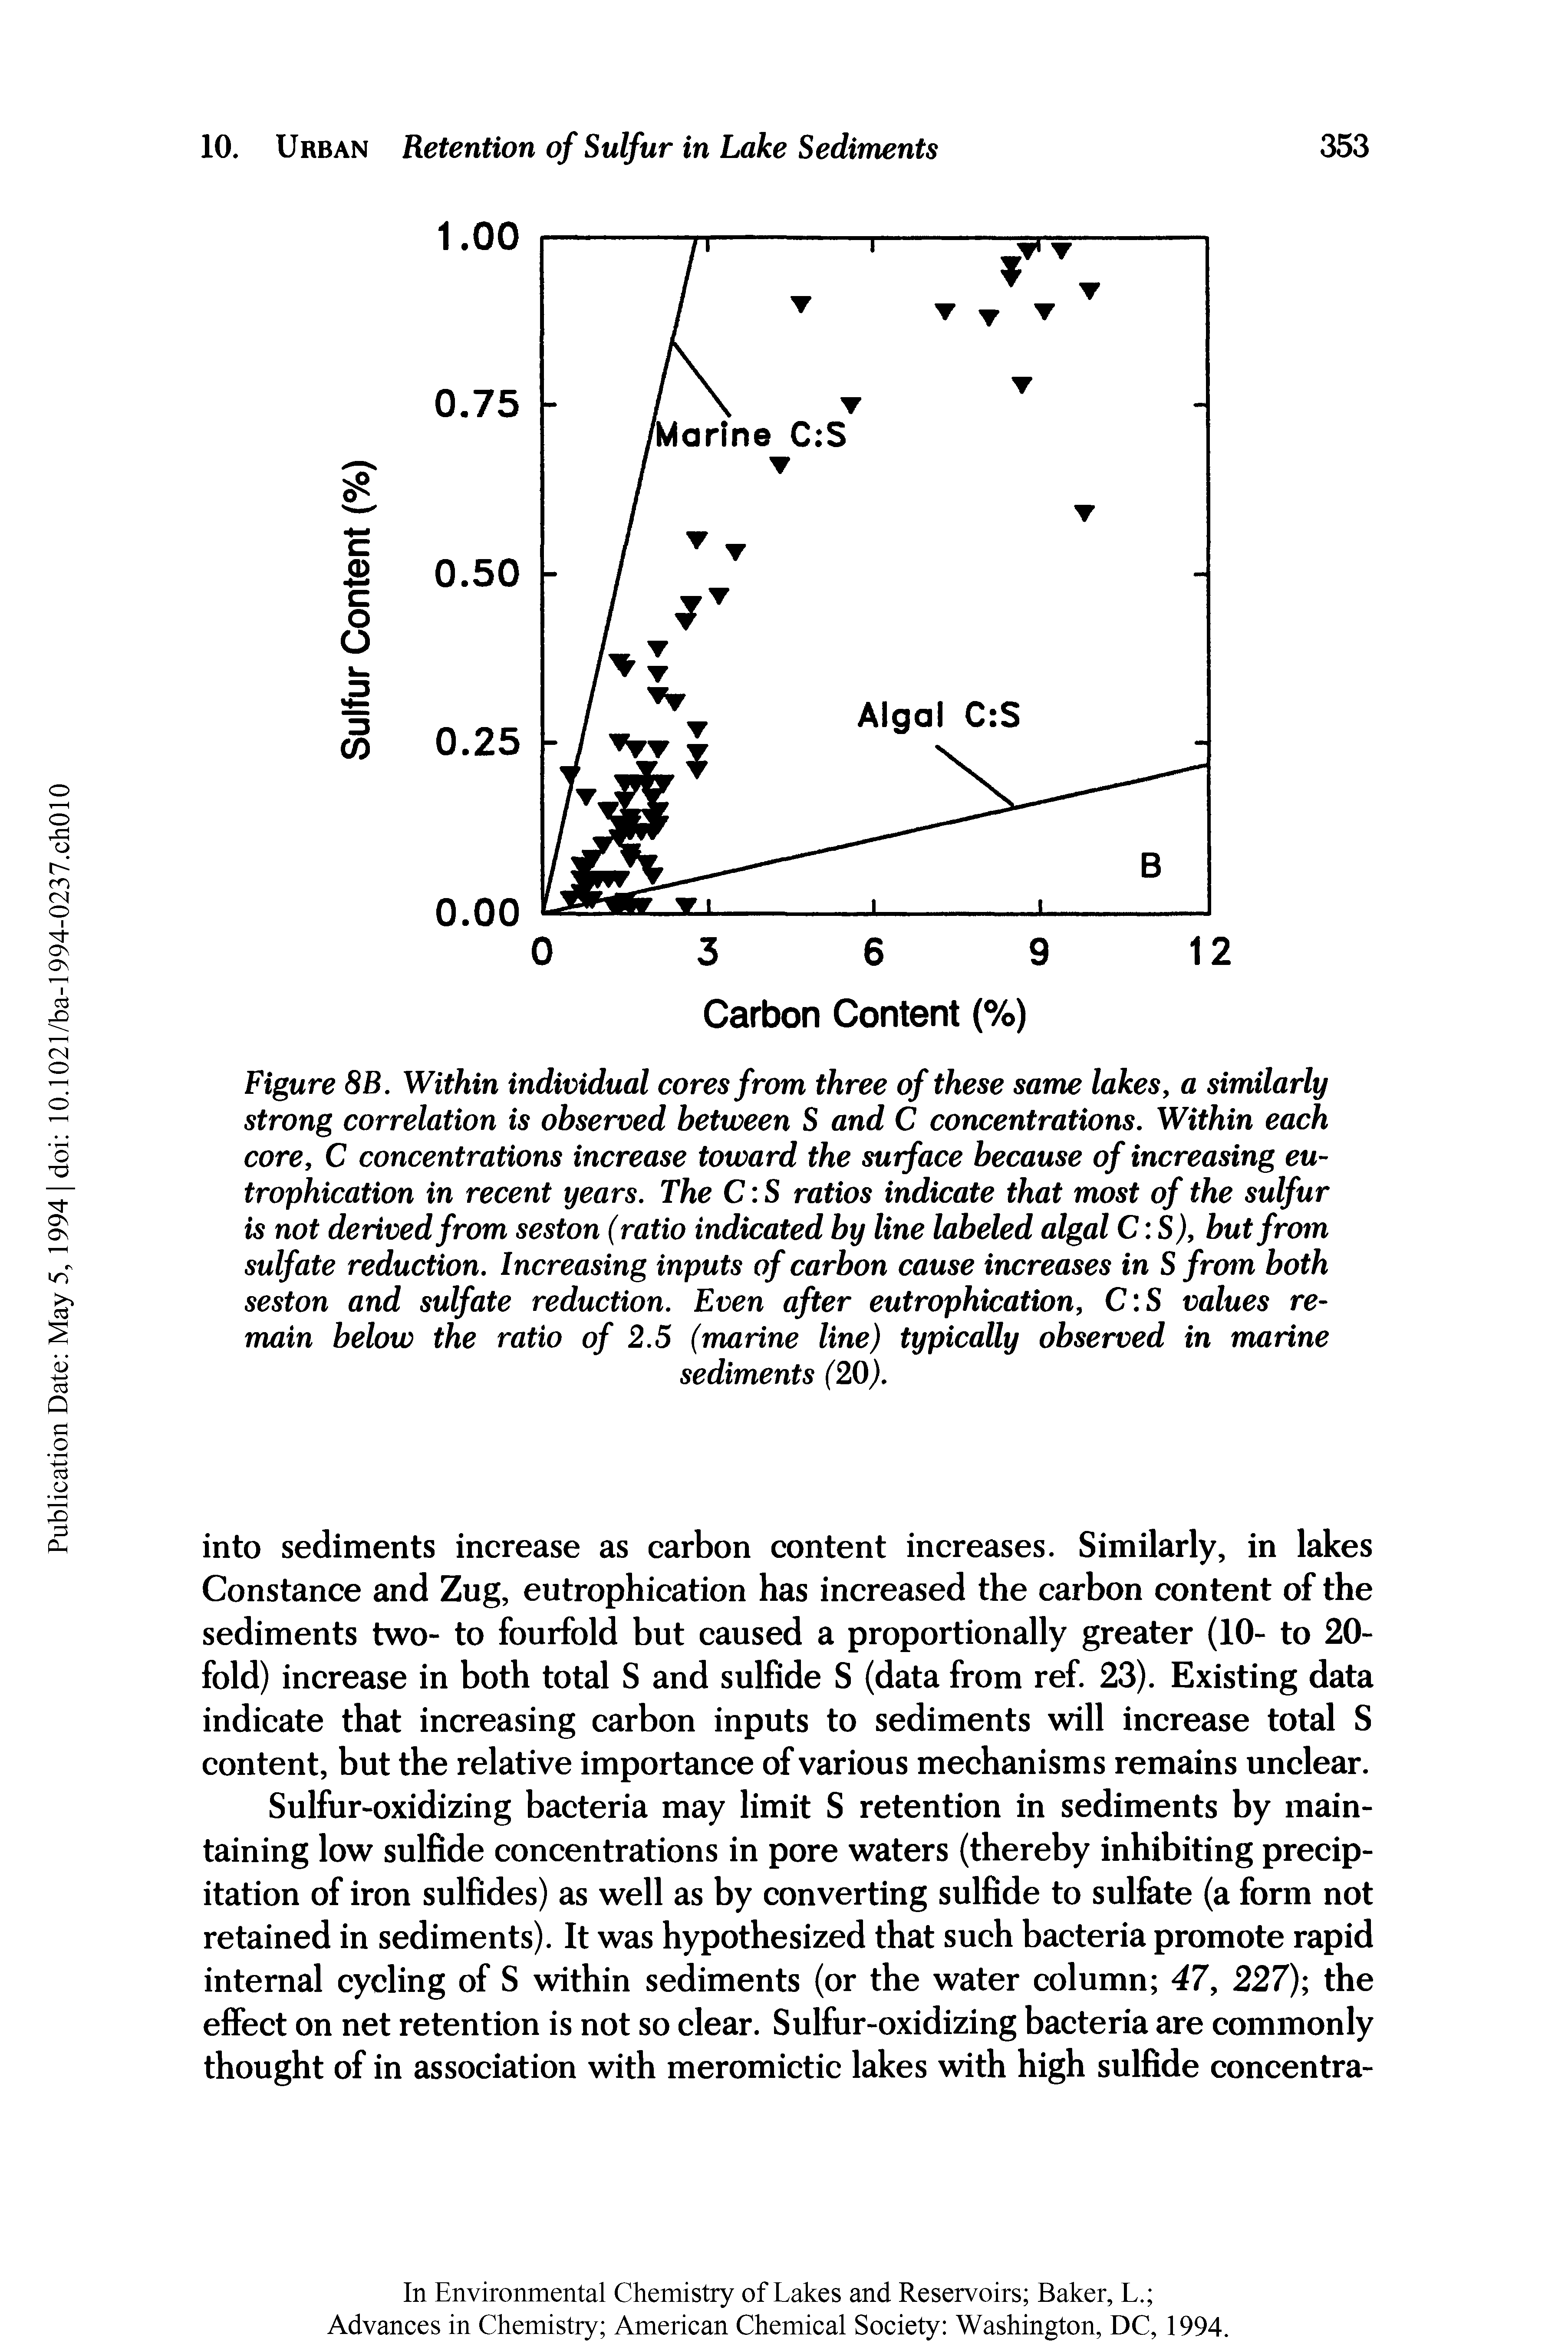 Figure 8B. Within individual cores from three of these same lakes, a similarly strong correlation is observed between S and C concentrations. Within each core, C concentrations increase toward the surface because of increasing eutrophication in recent years. The C S ratios indicate that most of the sulfur is not derived from seston (ratio indicated by line labeled algal C S), but from sulfate reduction. Increasing inputs of carbon cause increases in S from both seston and sulfate reduction. Even after eutrophication, C S values remain below the ratio of 2.5 (marine line) typically observed in marine...